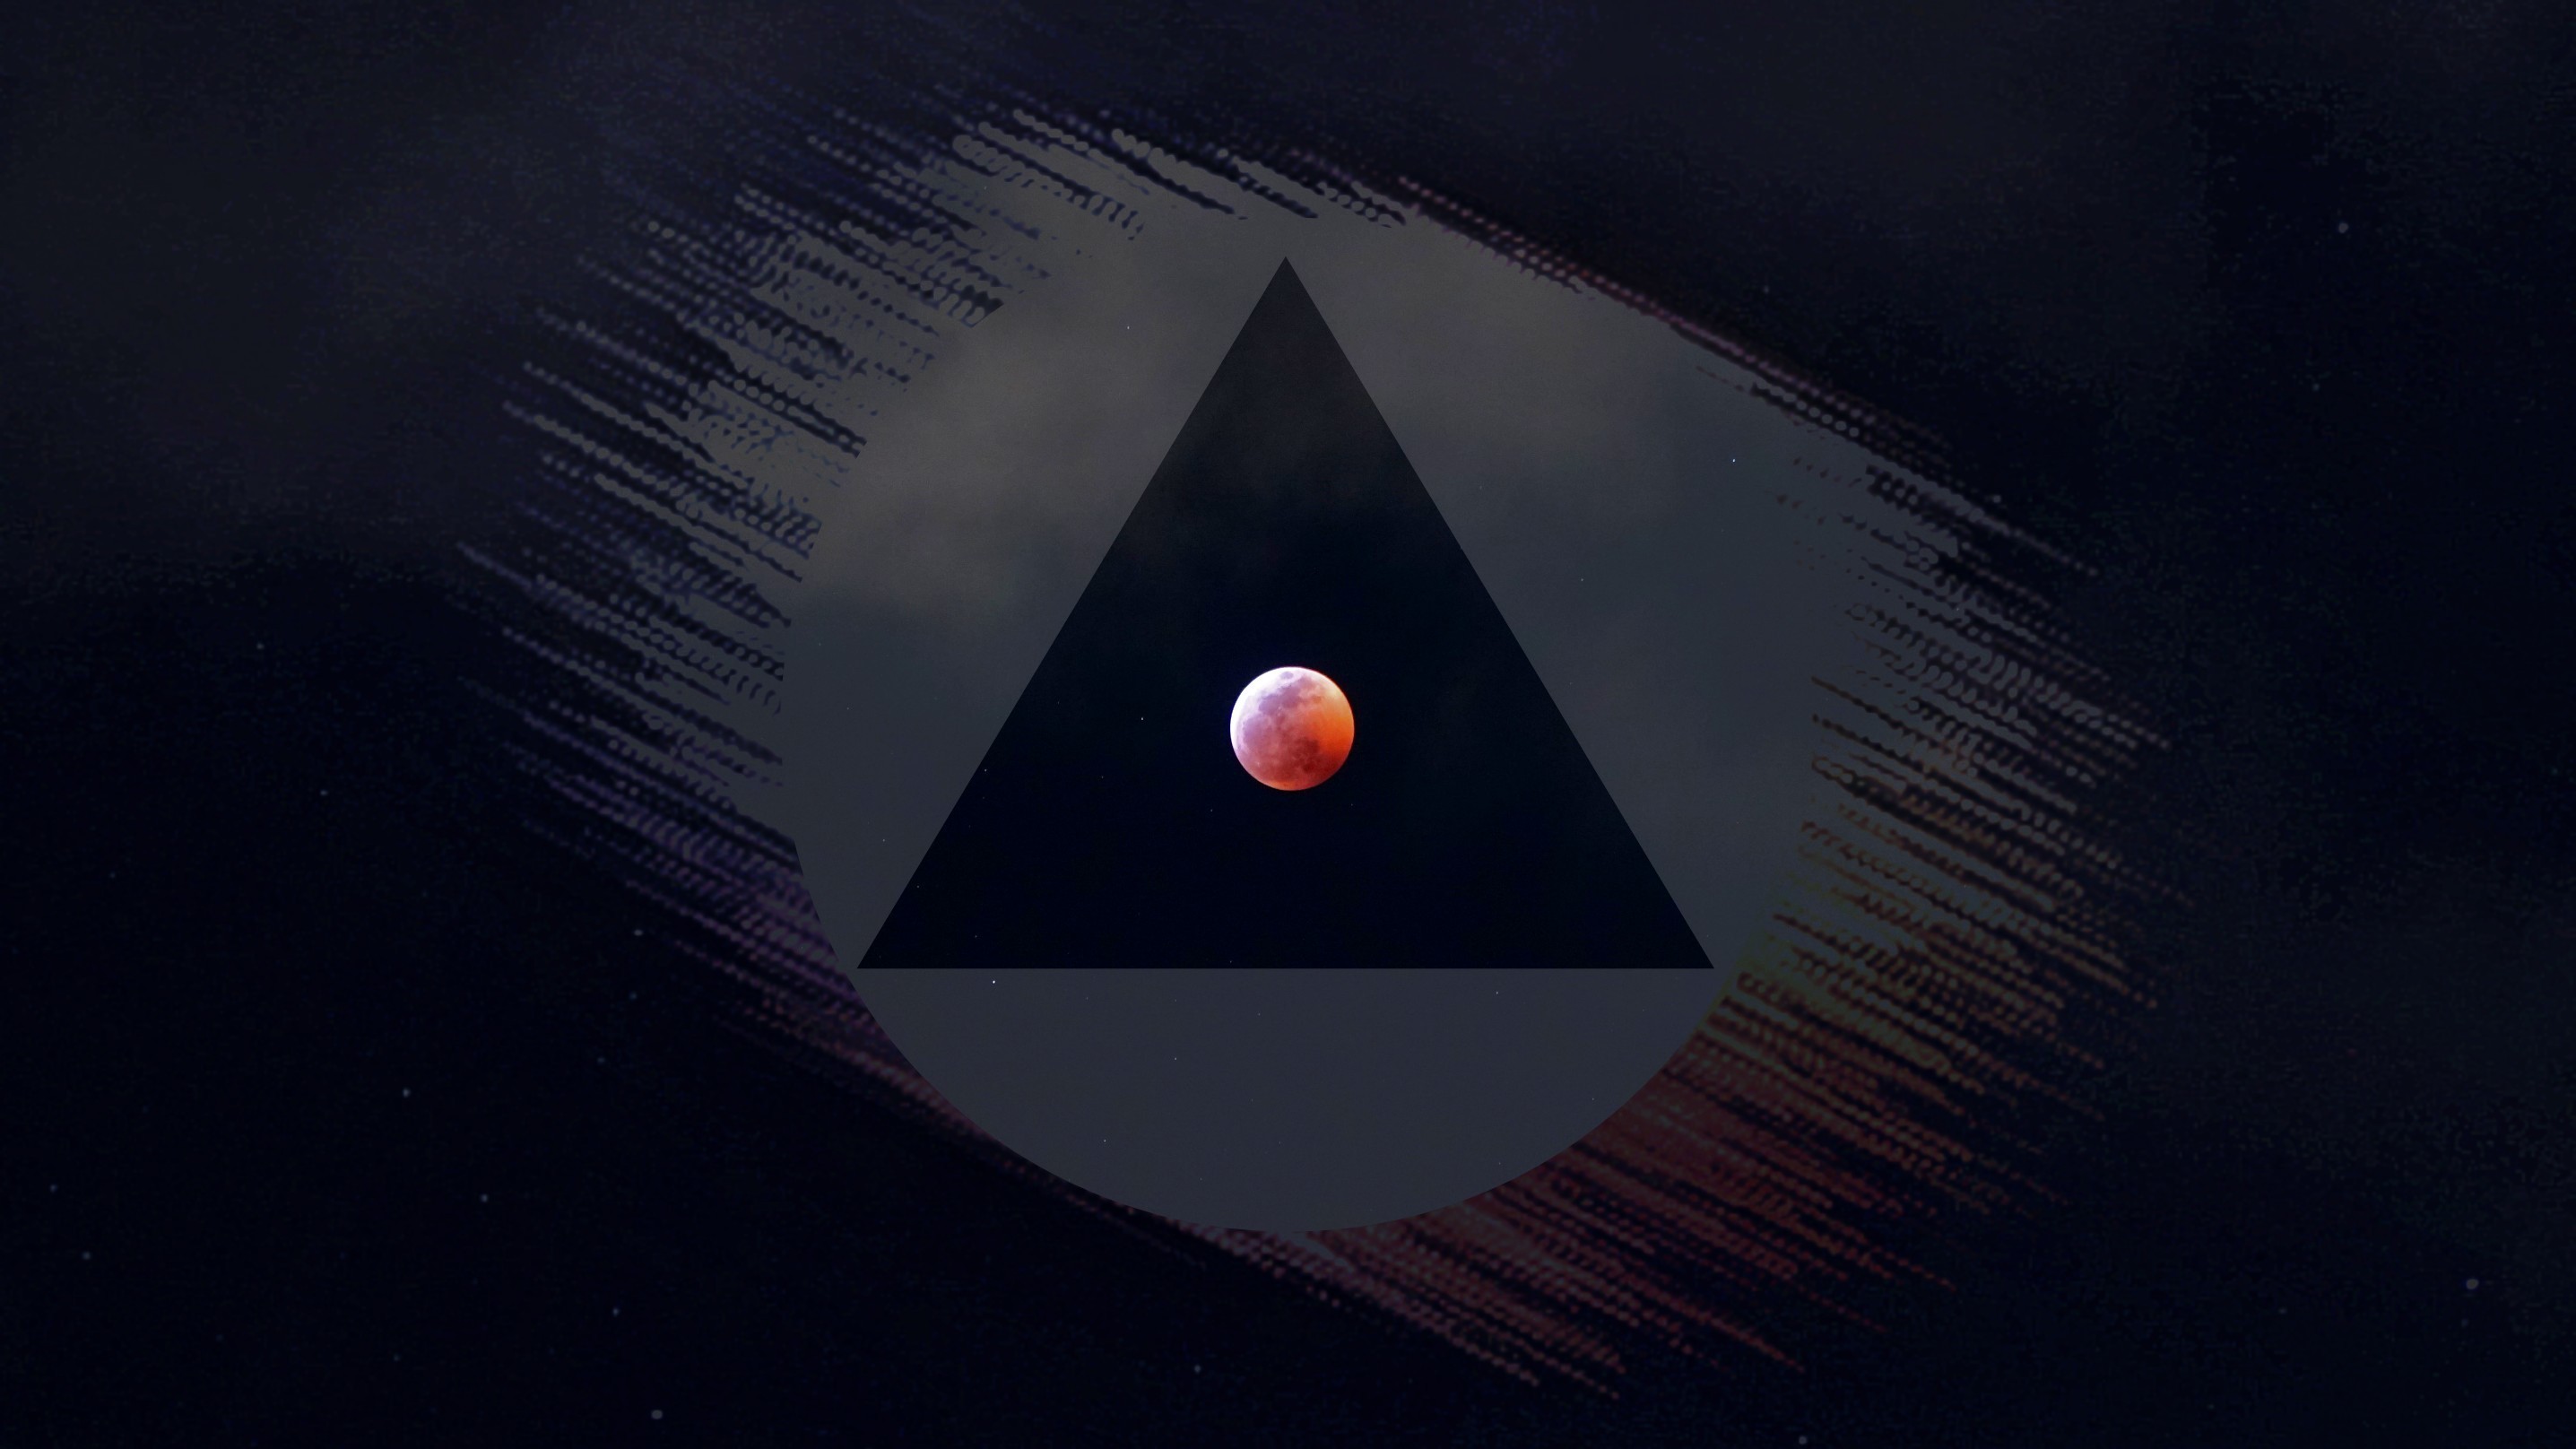 2873x1616 Album: Got a killer shot of the Blood Moon last night, and had fun making  some neat wallpapers out of it. Enjoy! Tags: /r/wallpapers Reddit Nature  Outdoors ...